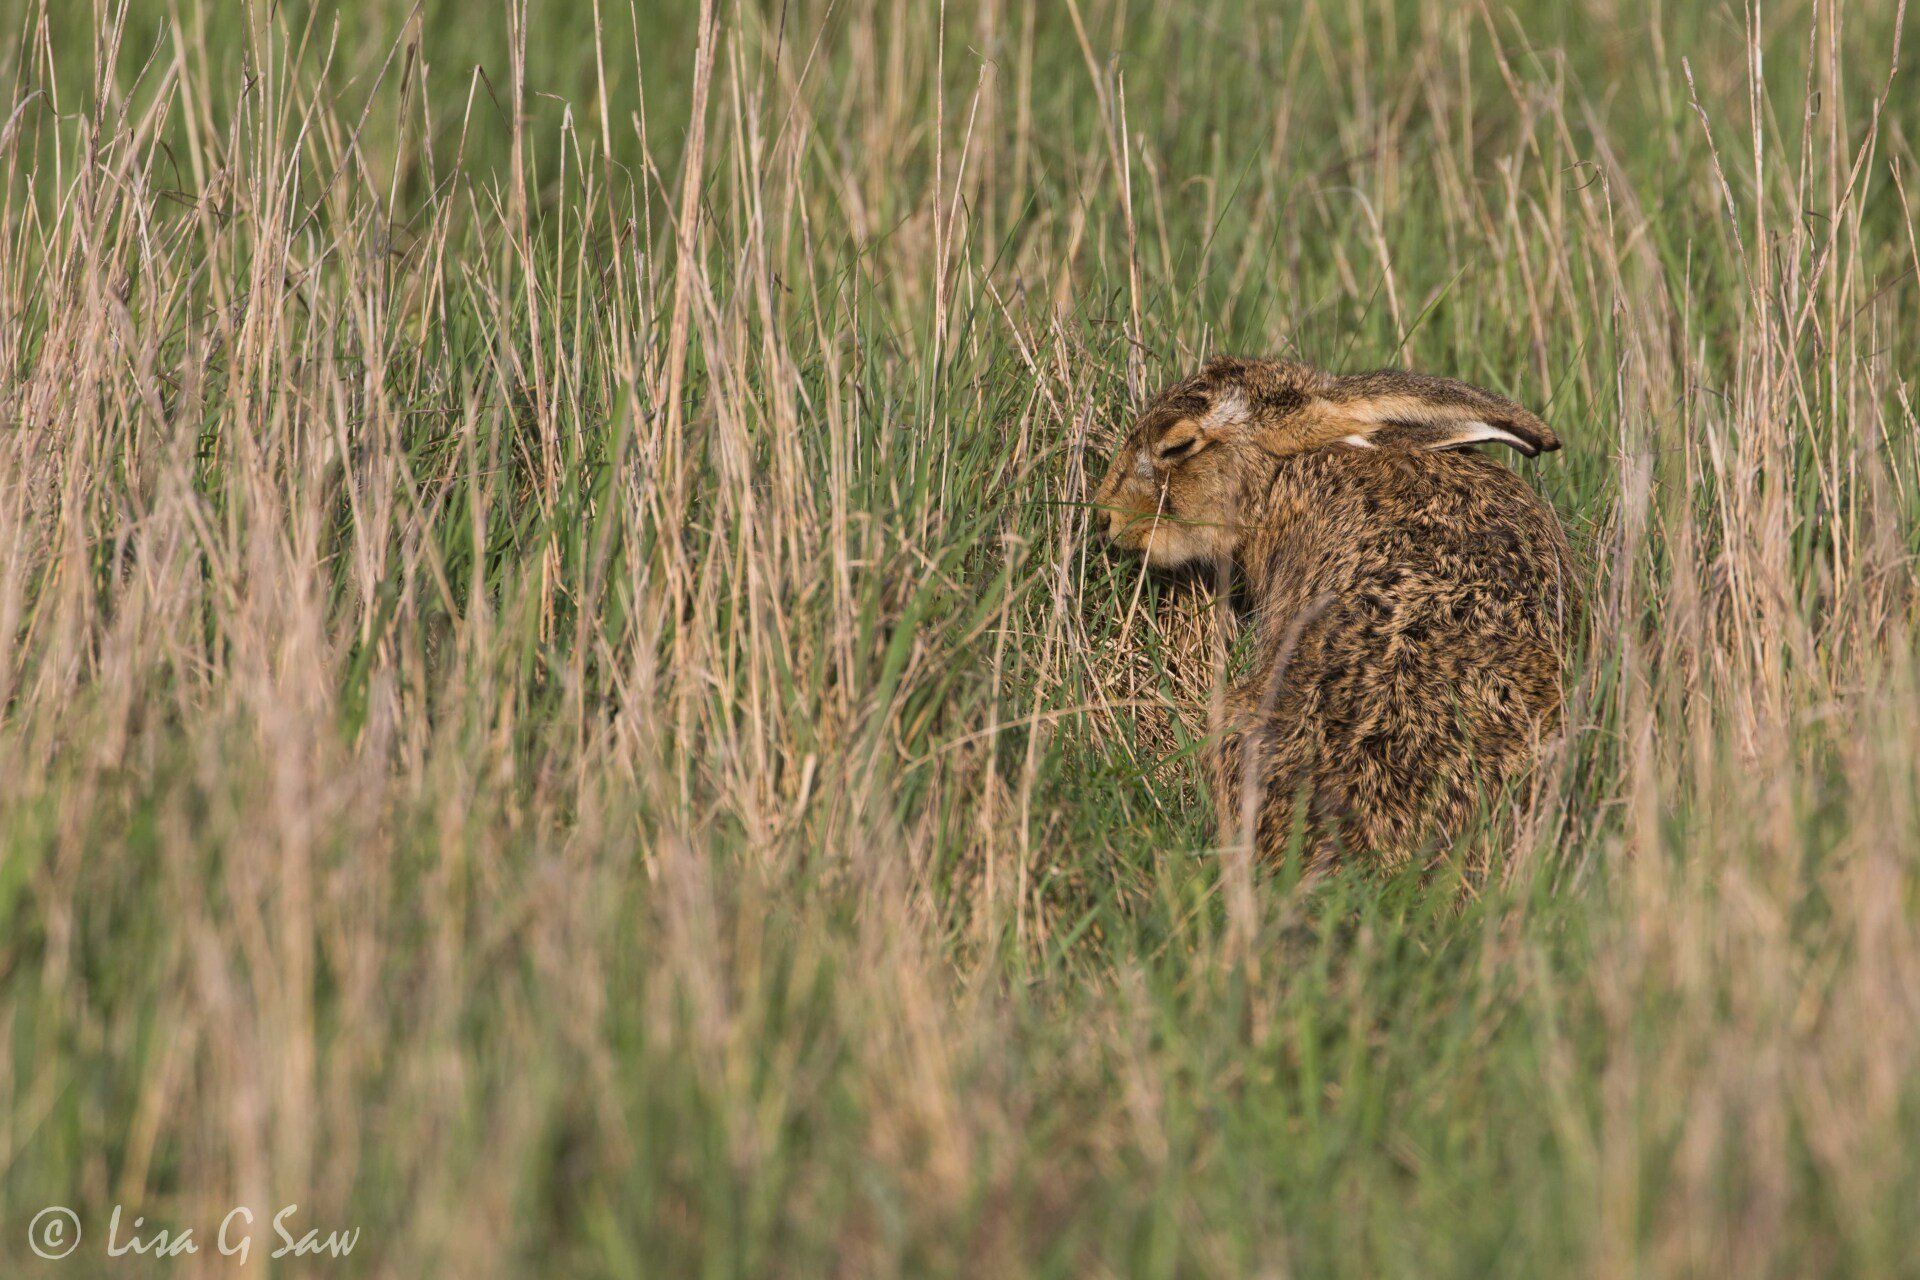 Hare with its eyes closed